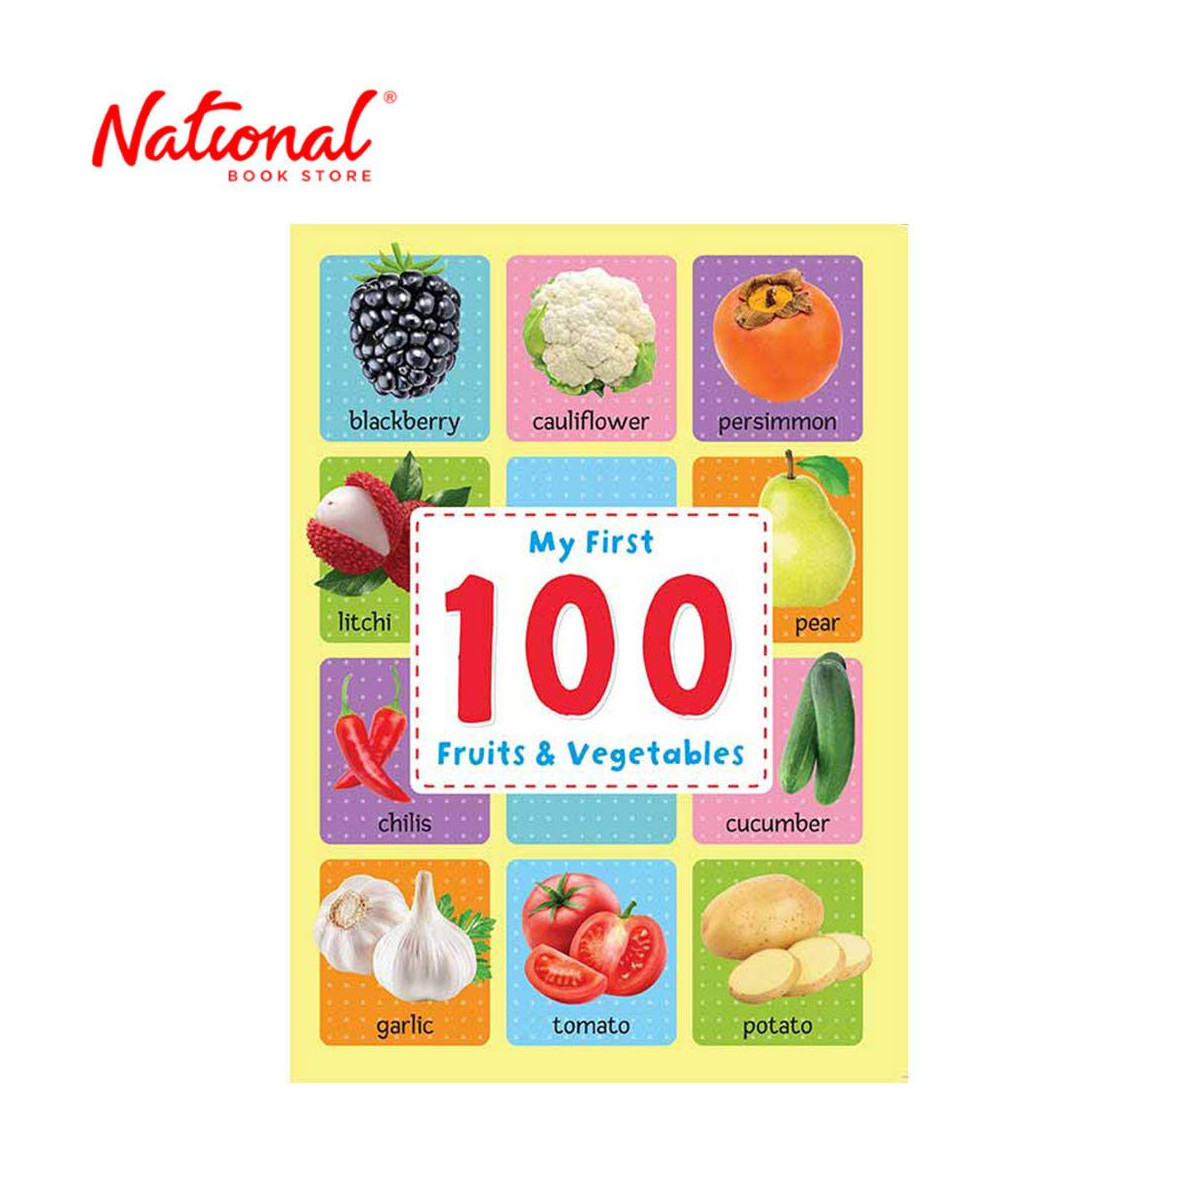 My First 100 Fruits & Vegetables - Board Book for Kids